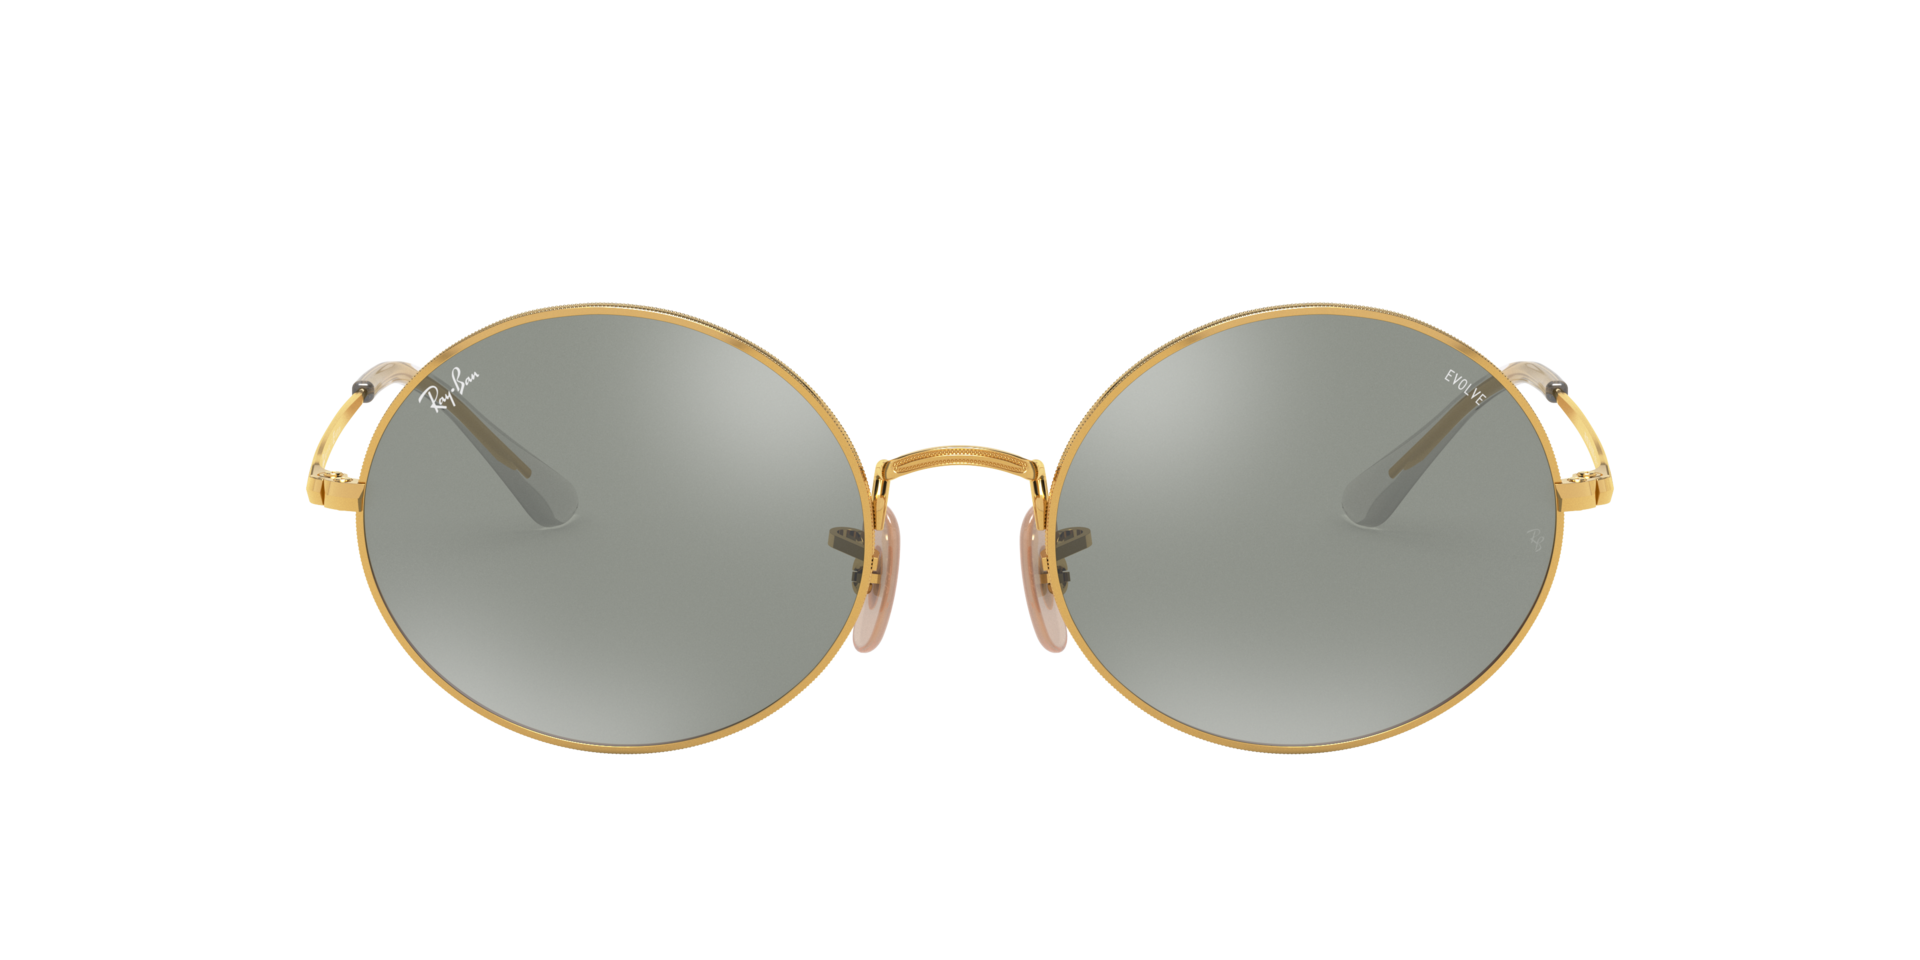 Buy Ray-Ban Oval 1970 Mirror Evolve Sunglasses Online.